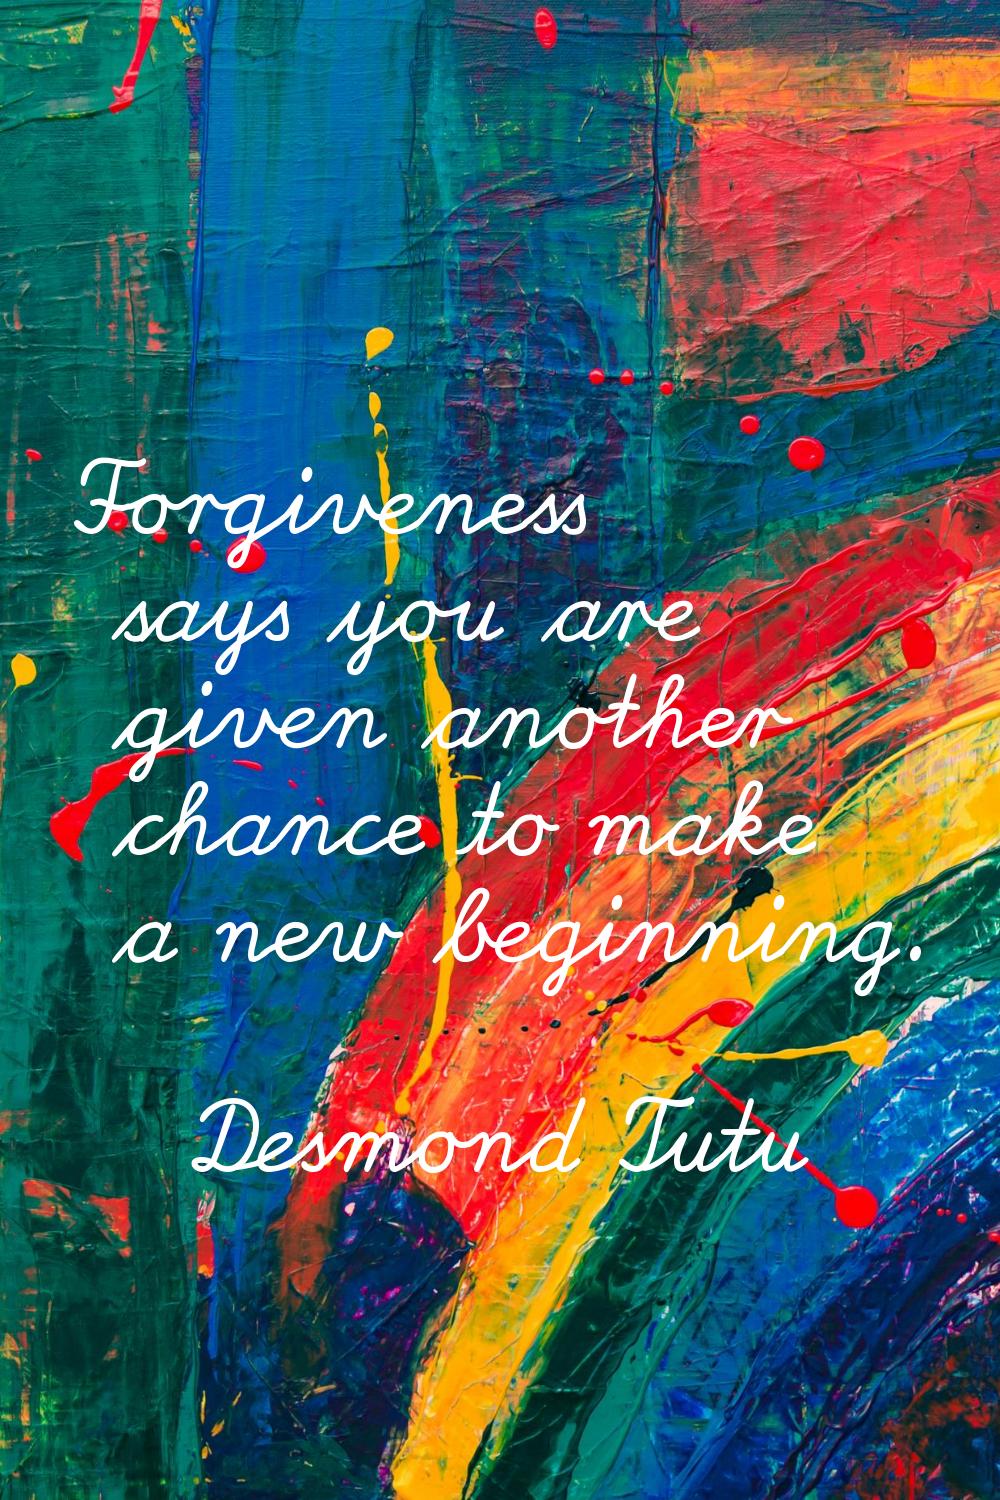 Forgiveness says you are given another chance to make a new beginning.